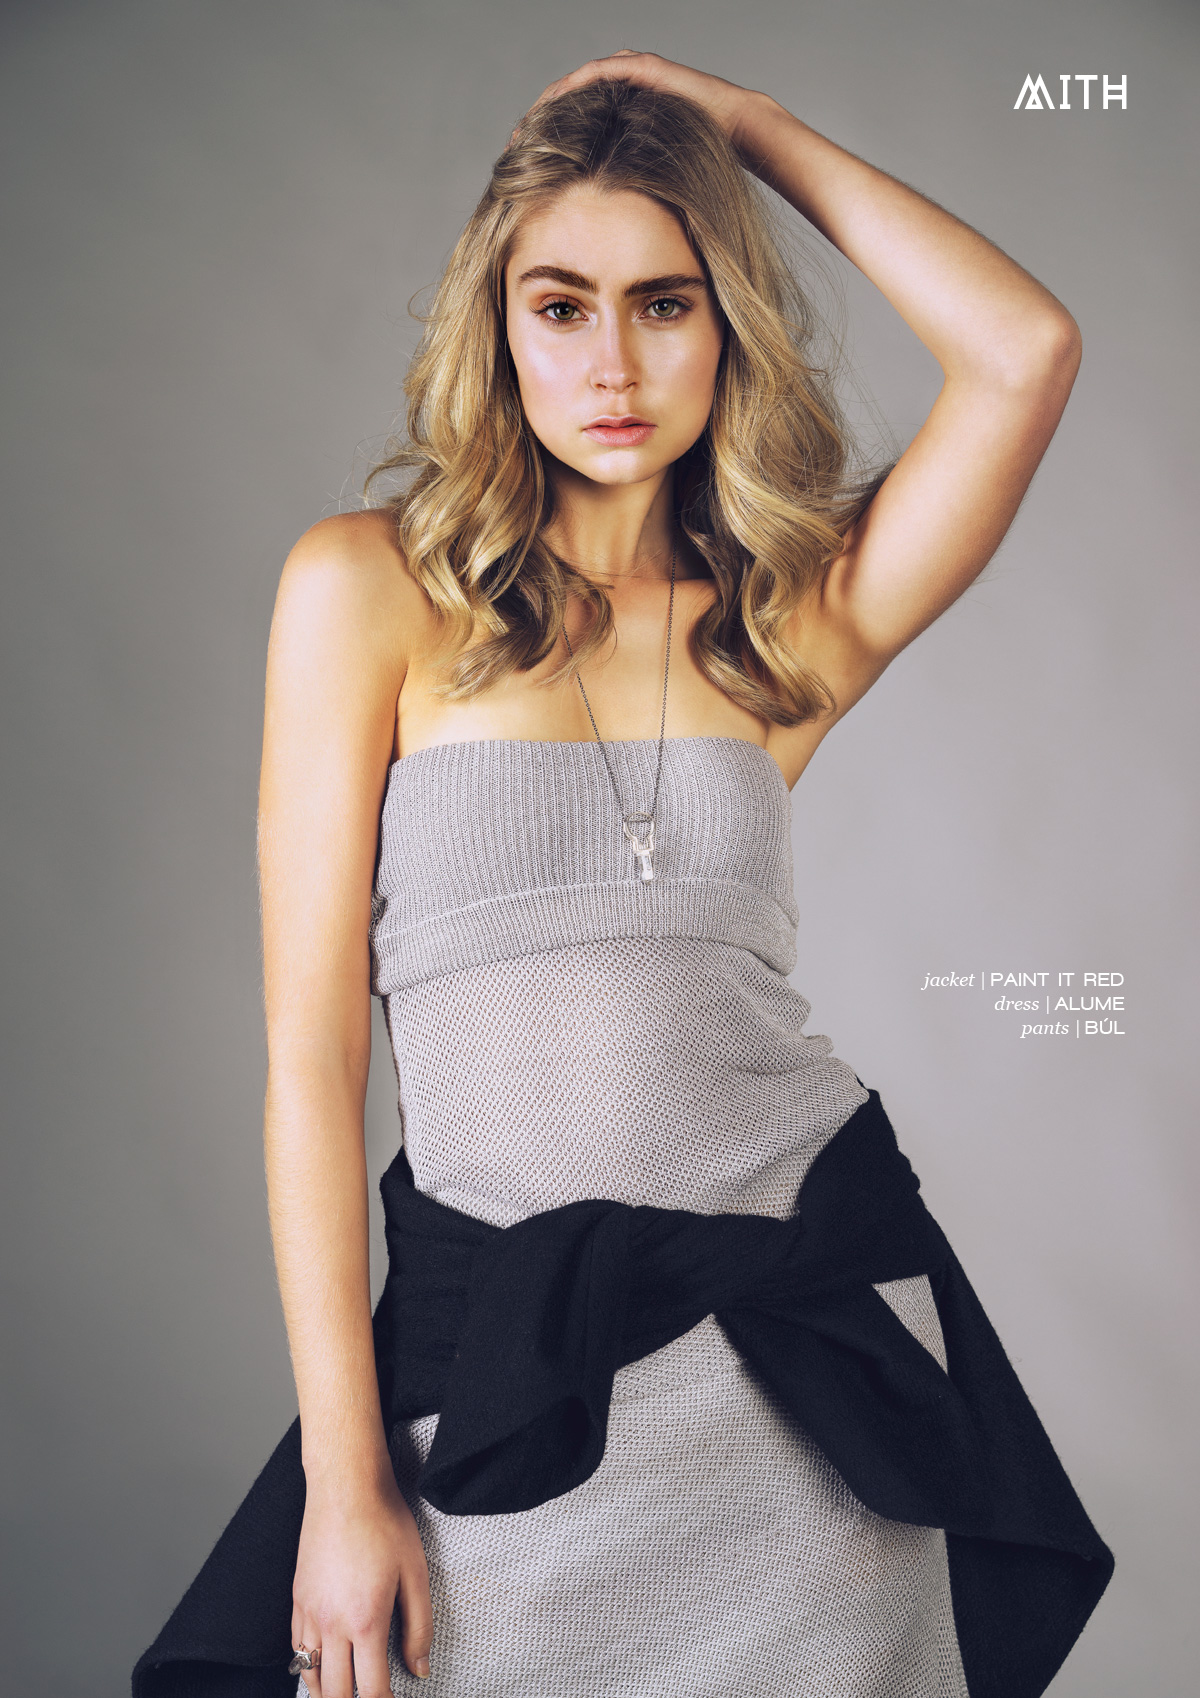 "Out & In" :: Paris Riddle @ FiveTwenty Management by Amy Nelson-Blain